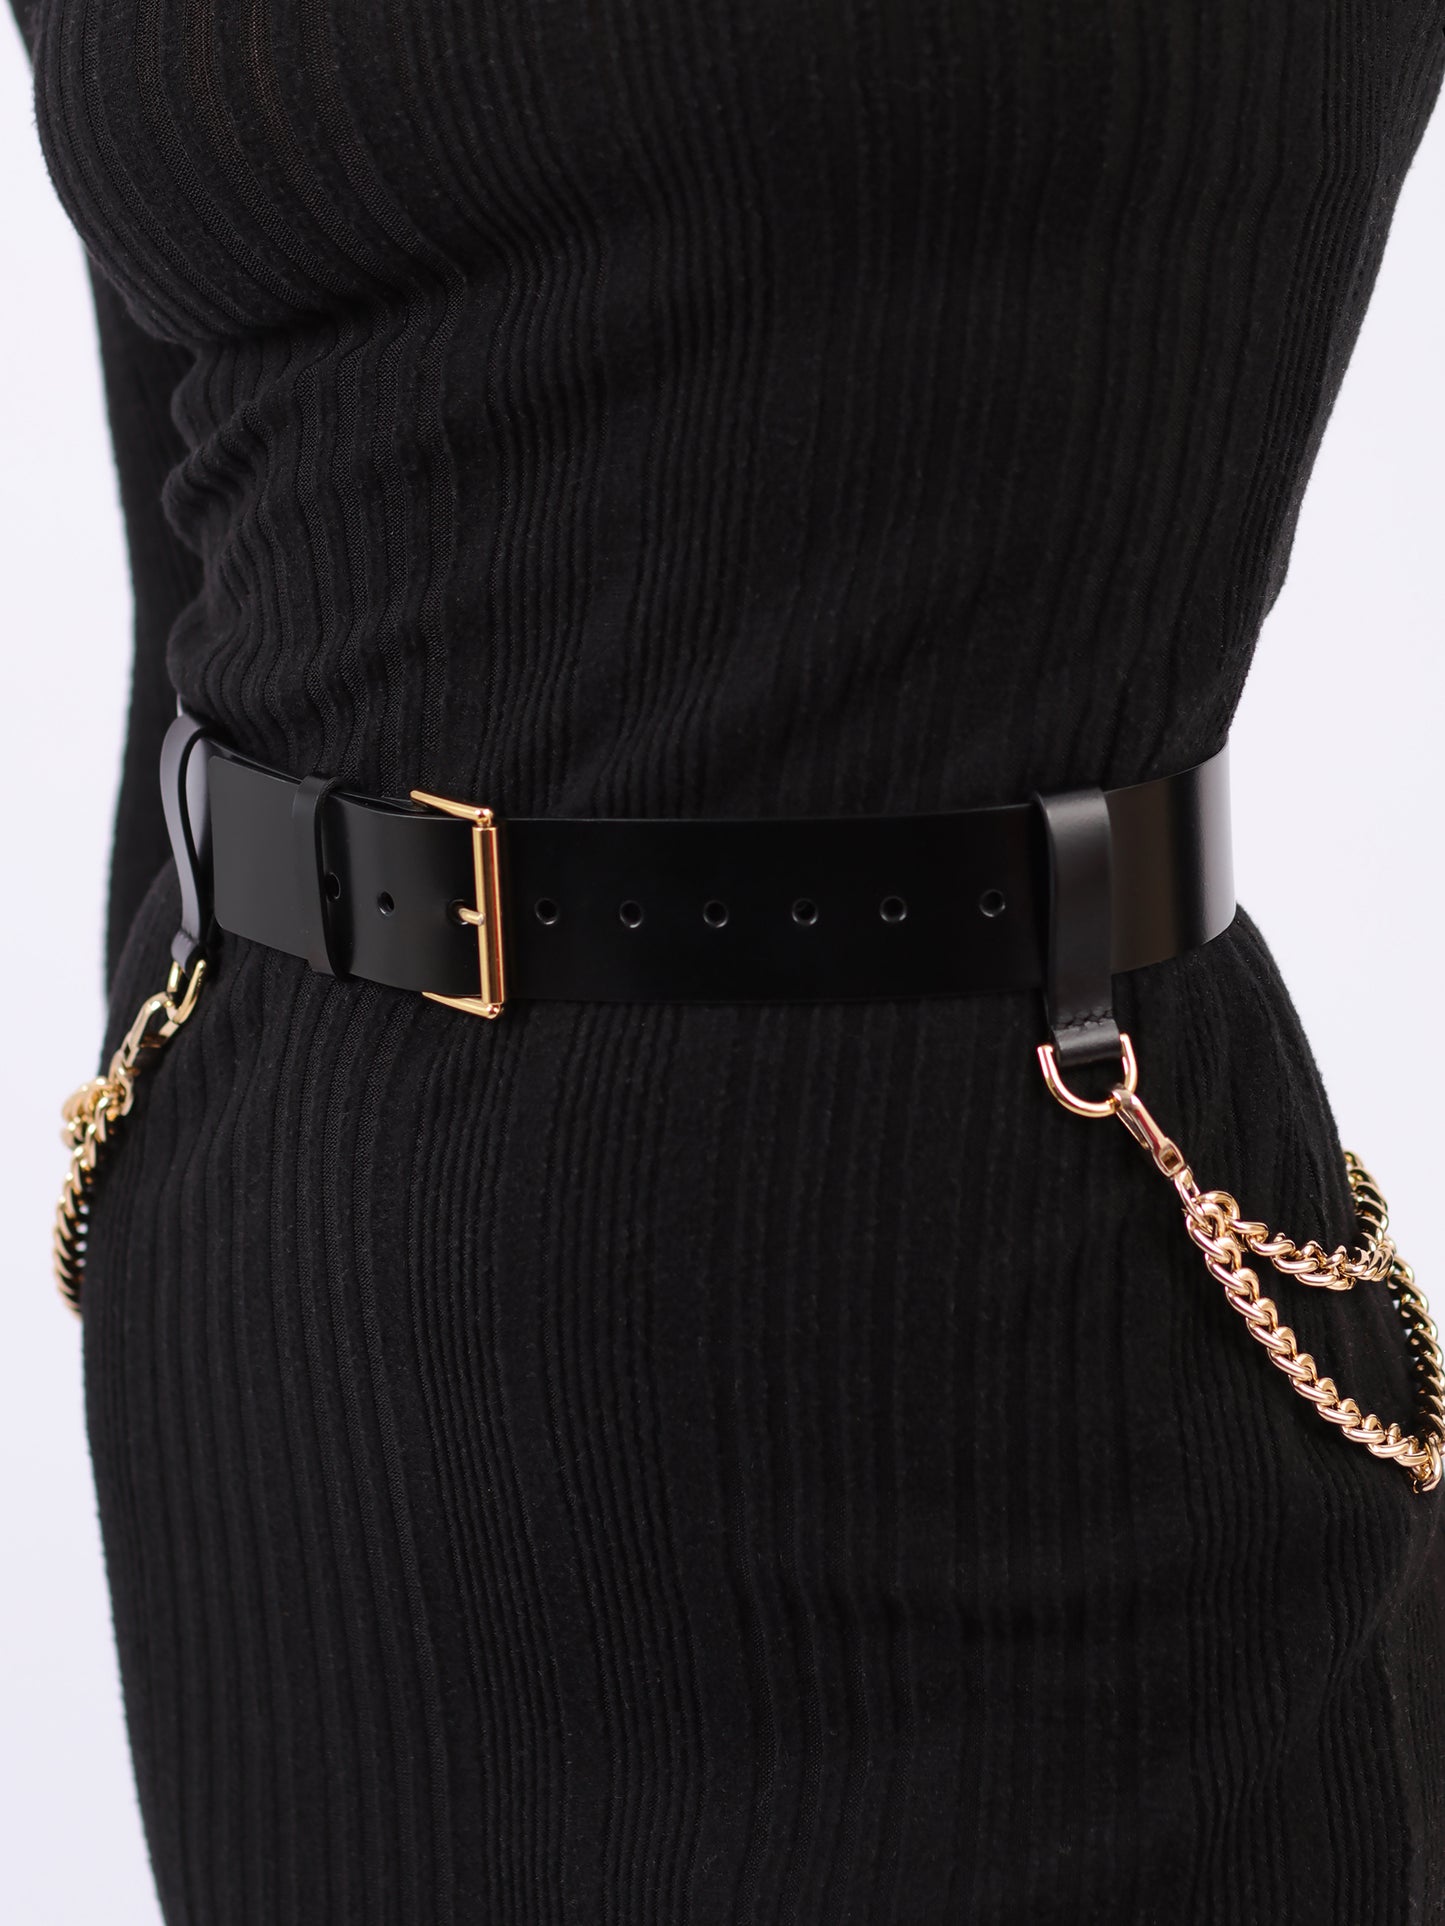 Detailed view of double chain leather belt.